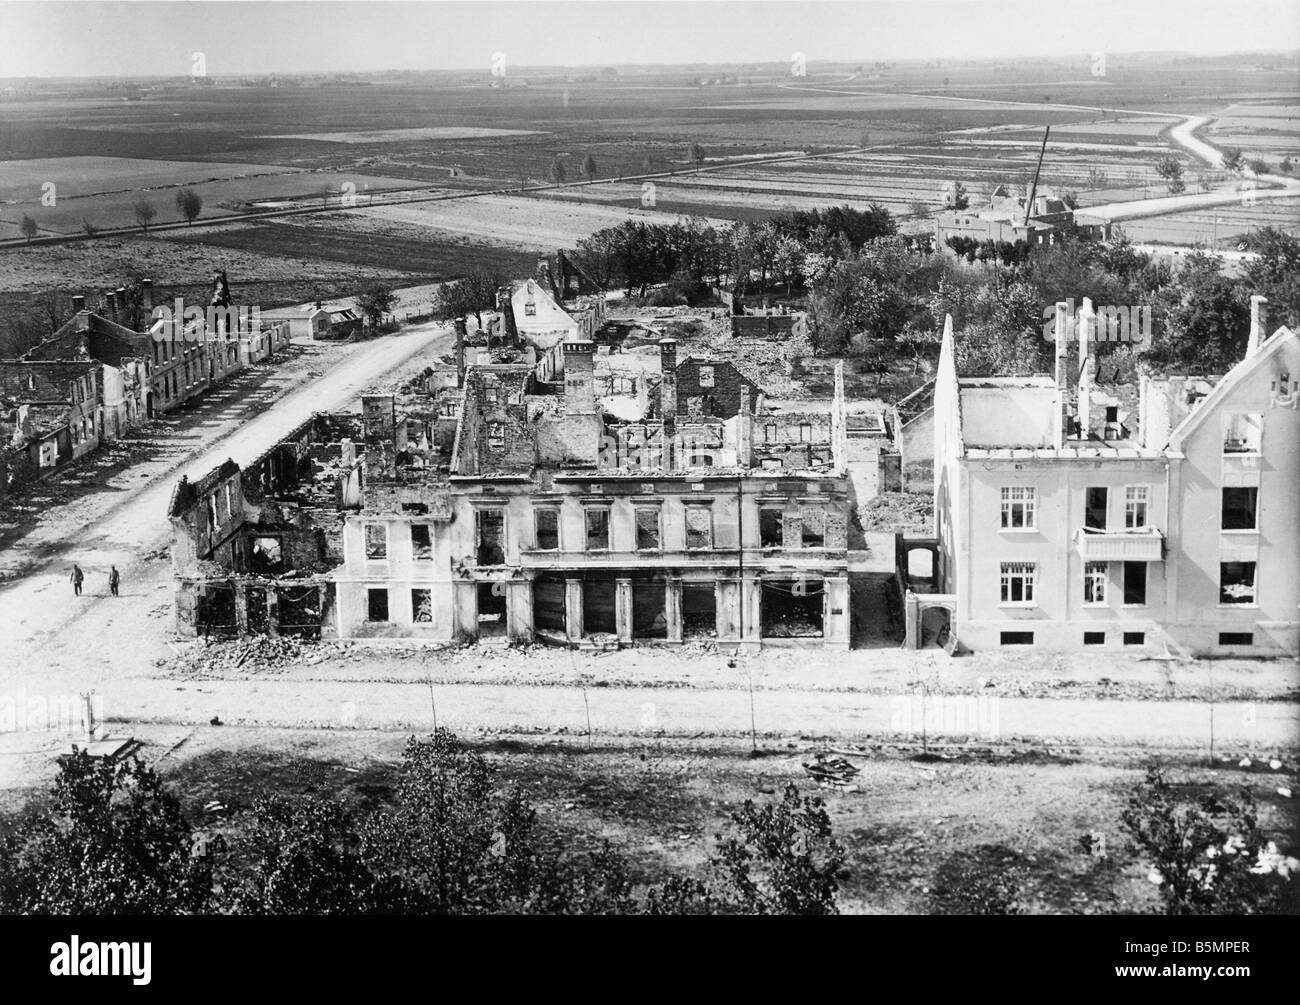 9 1914 8 26 A1 2 E East Front view of ruined houses World War I Eastern Front Battle near Tannenberg Masuren East Prussia from 2 Stock Photo